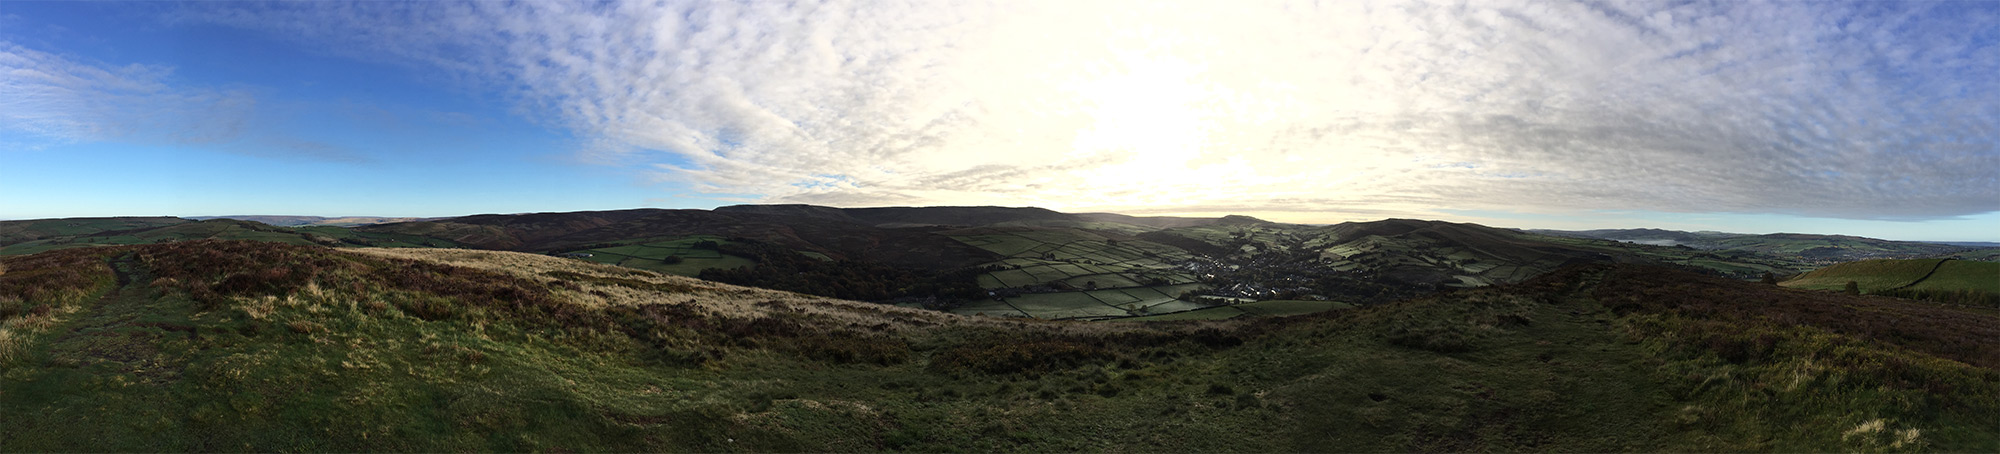 Lantern Pike Panoramic - Panoramic view from Lantern Pike Hill in Hayfield in the Peak District - photo by gavstretchy